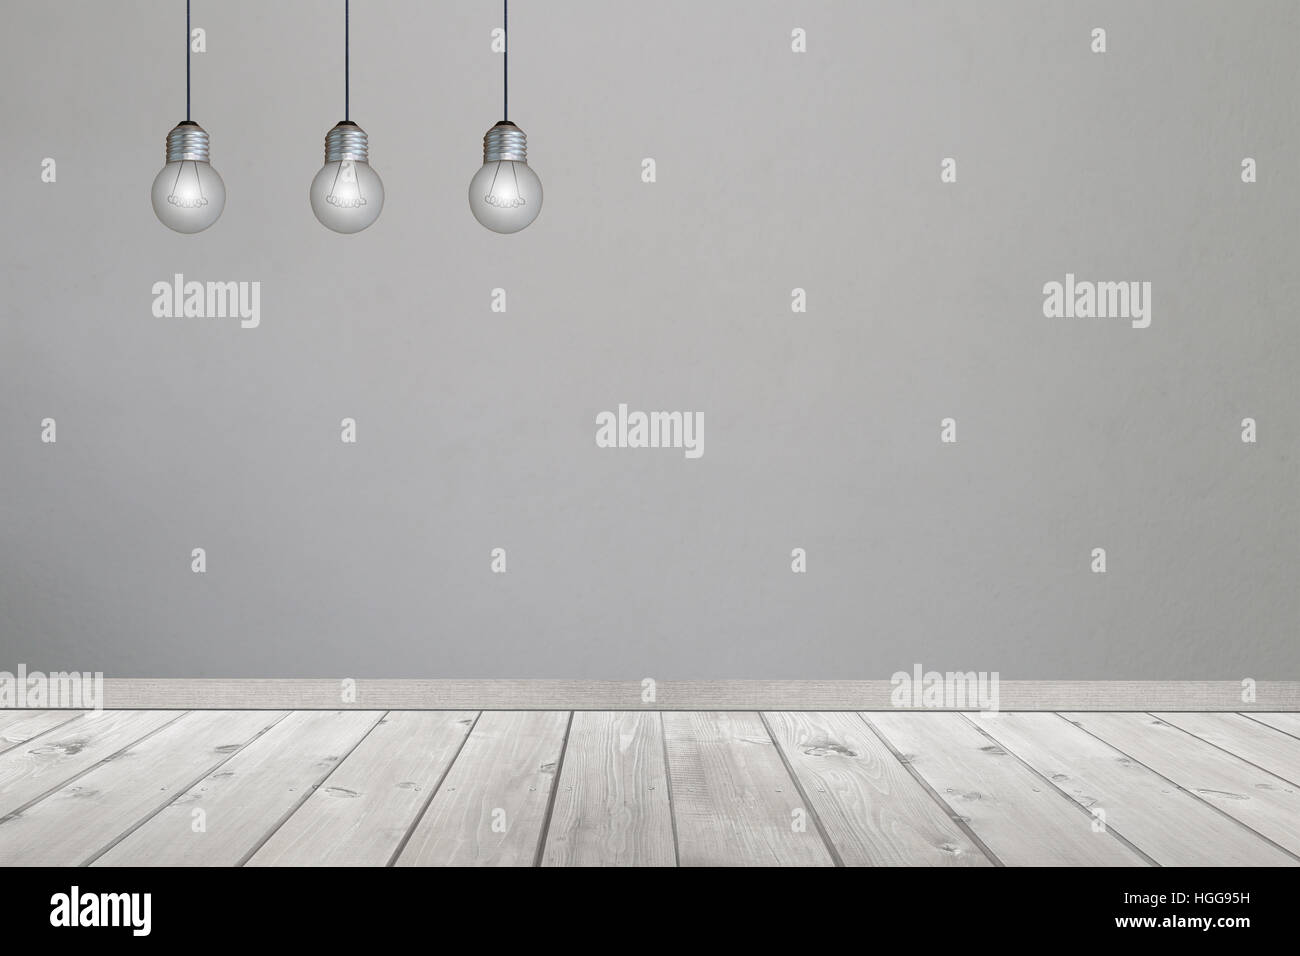 bulbs on hanging ceiling,Concept of electronics interior vintage. Stock Photo